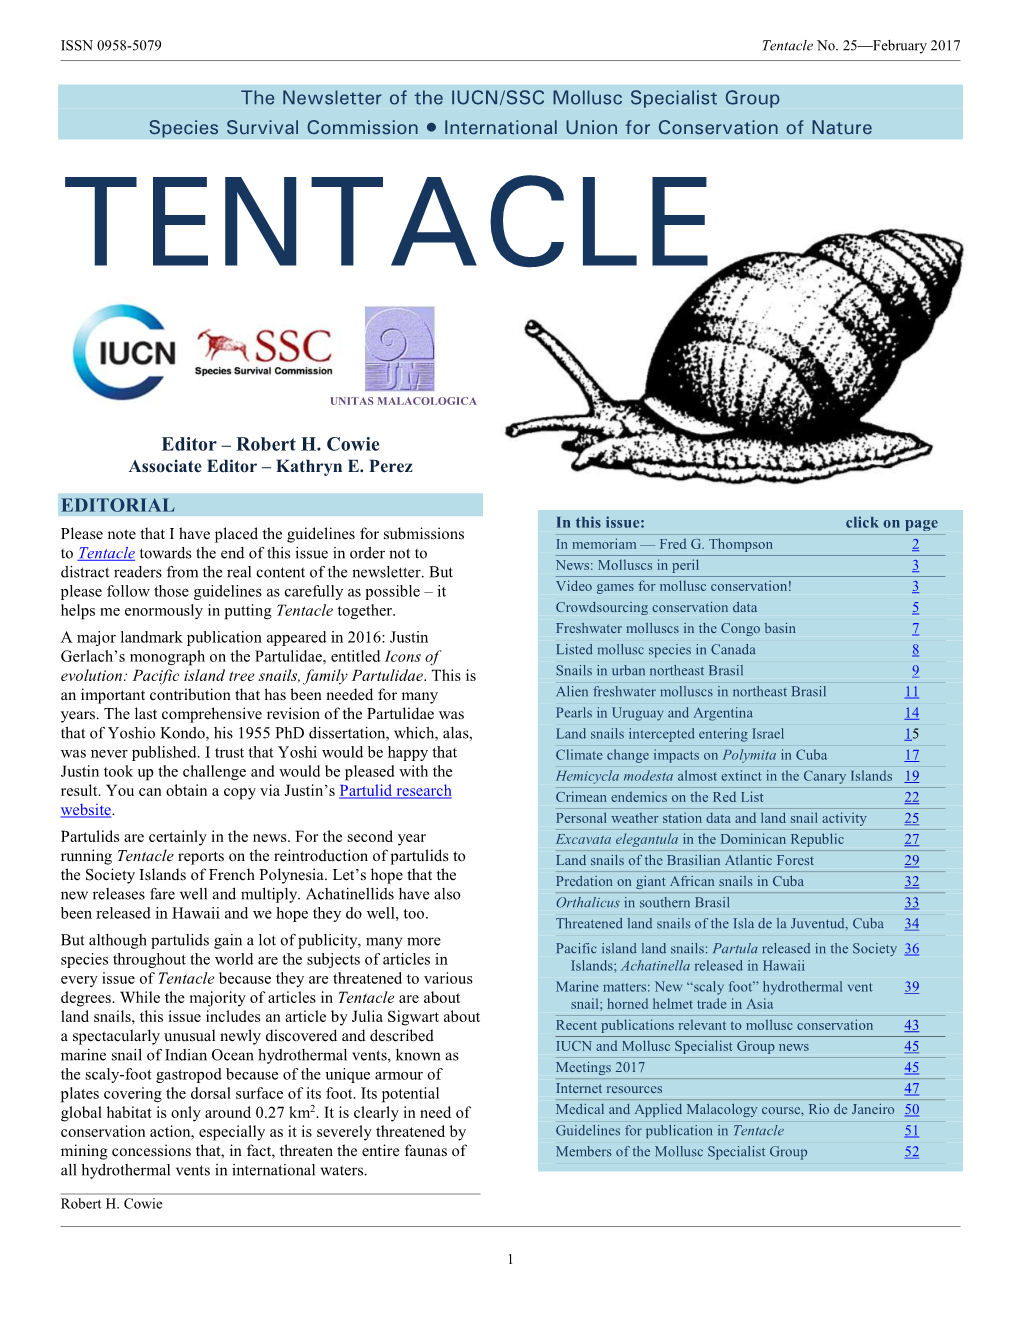 The Newsletter of the IUCN/SSC Mollusc Specialist Group Species Survival Commission International Union for Conservation of Nature TENTACLE